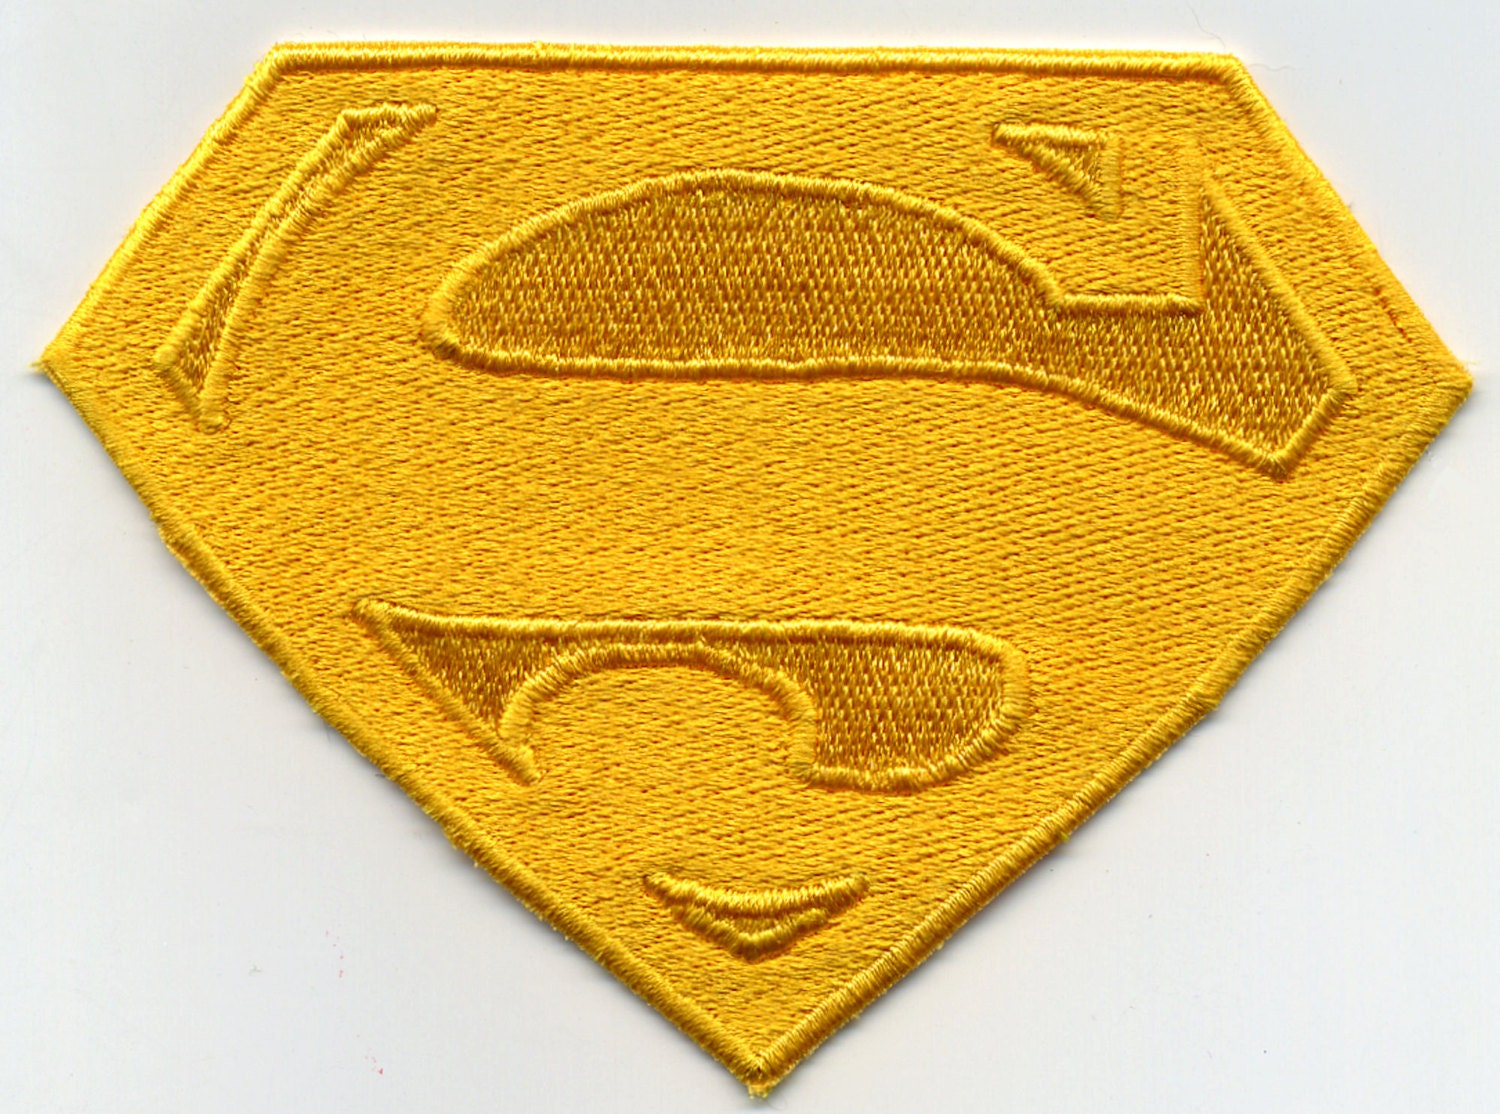 Kloppen De Alpen Bekwaam 3 X 4 Small All Yellow Fully Embroidered Superman - Etsy